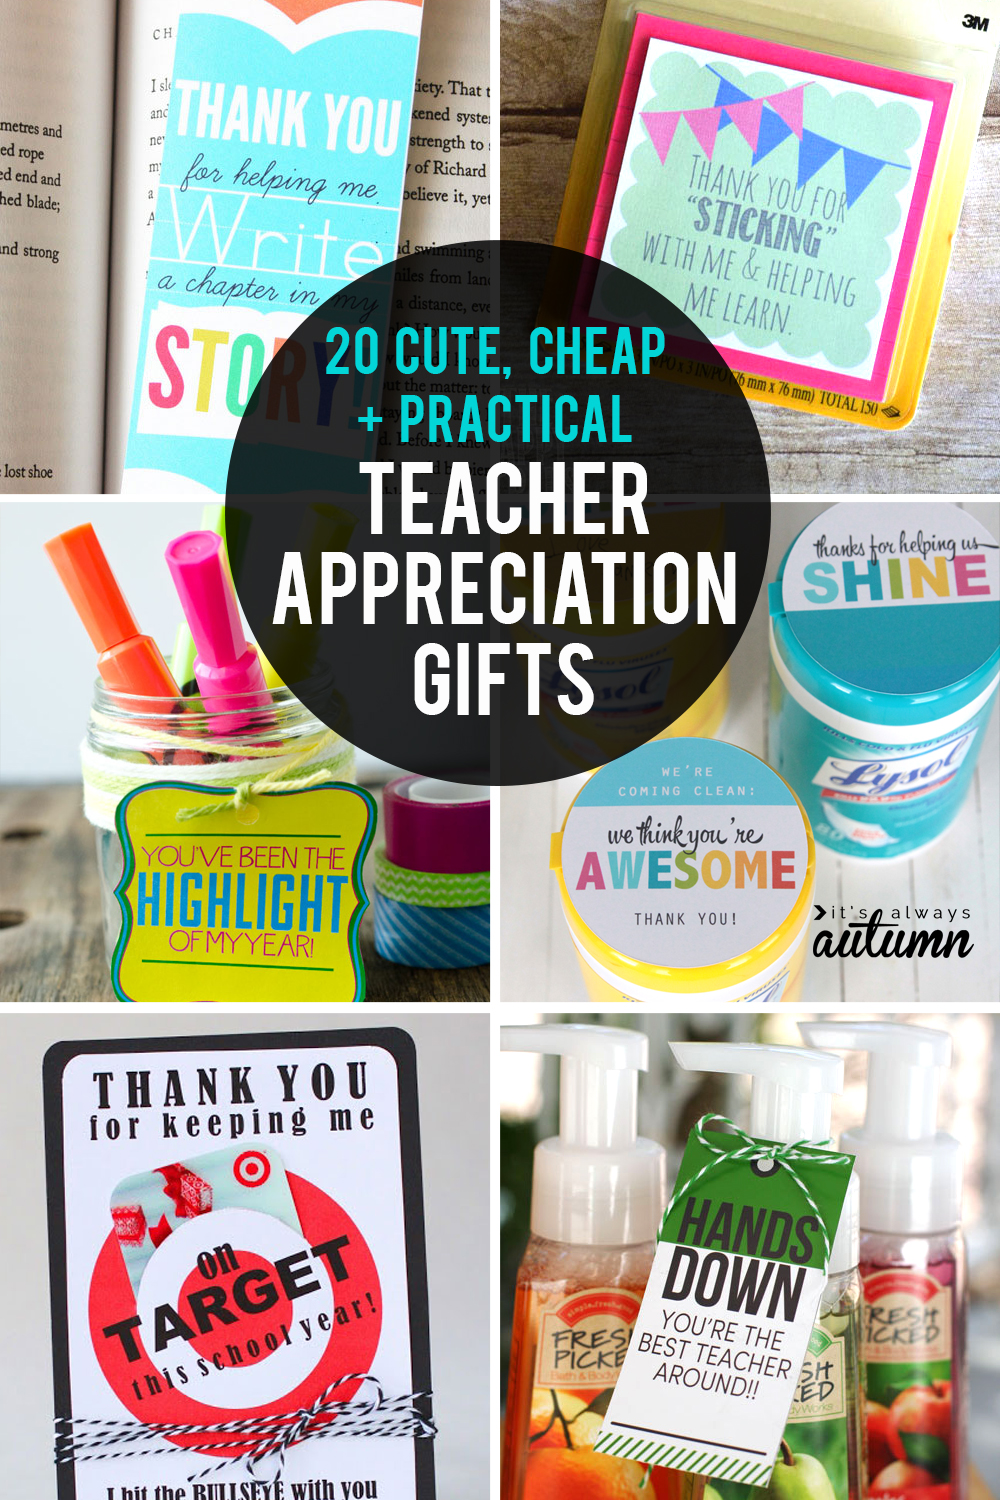 50 Thank You Gift Ideas to Appreciate Kind People - Craftionary